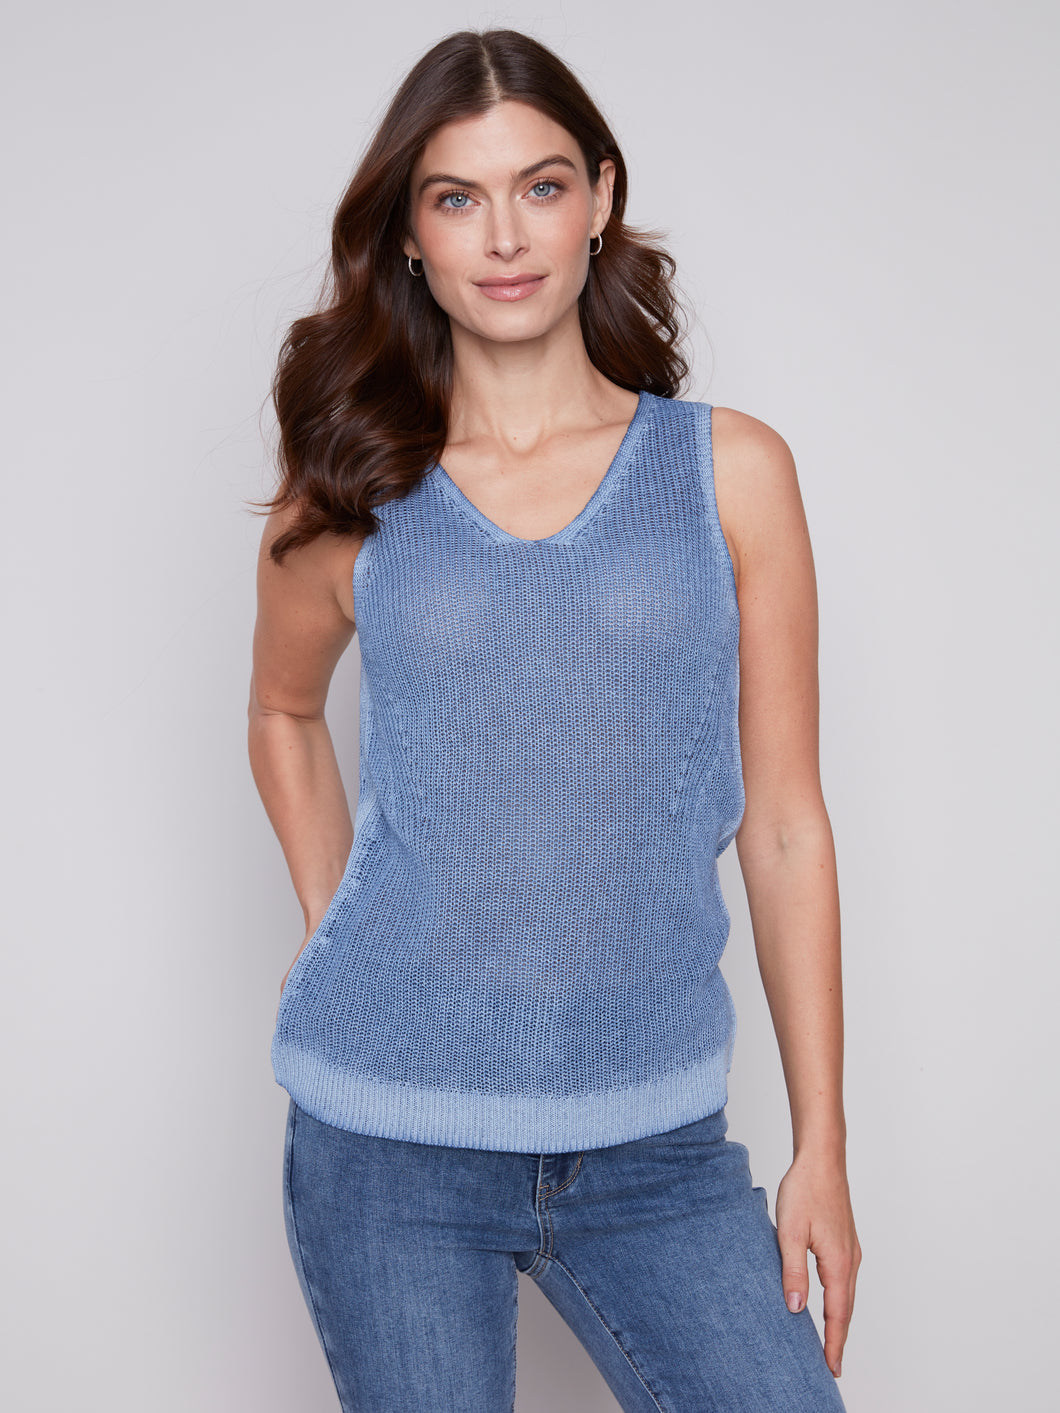 Charlie B V-Neck Cold Dye Light Knit Cami With Side Diagonal Stitch Detail in Denim or Dusty Rose